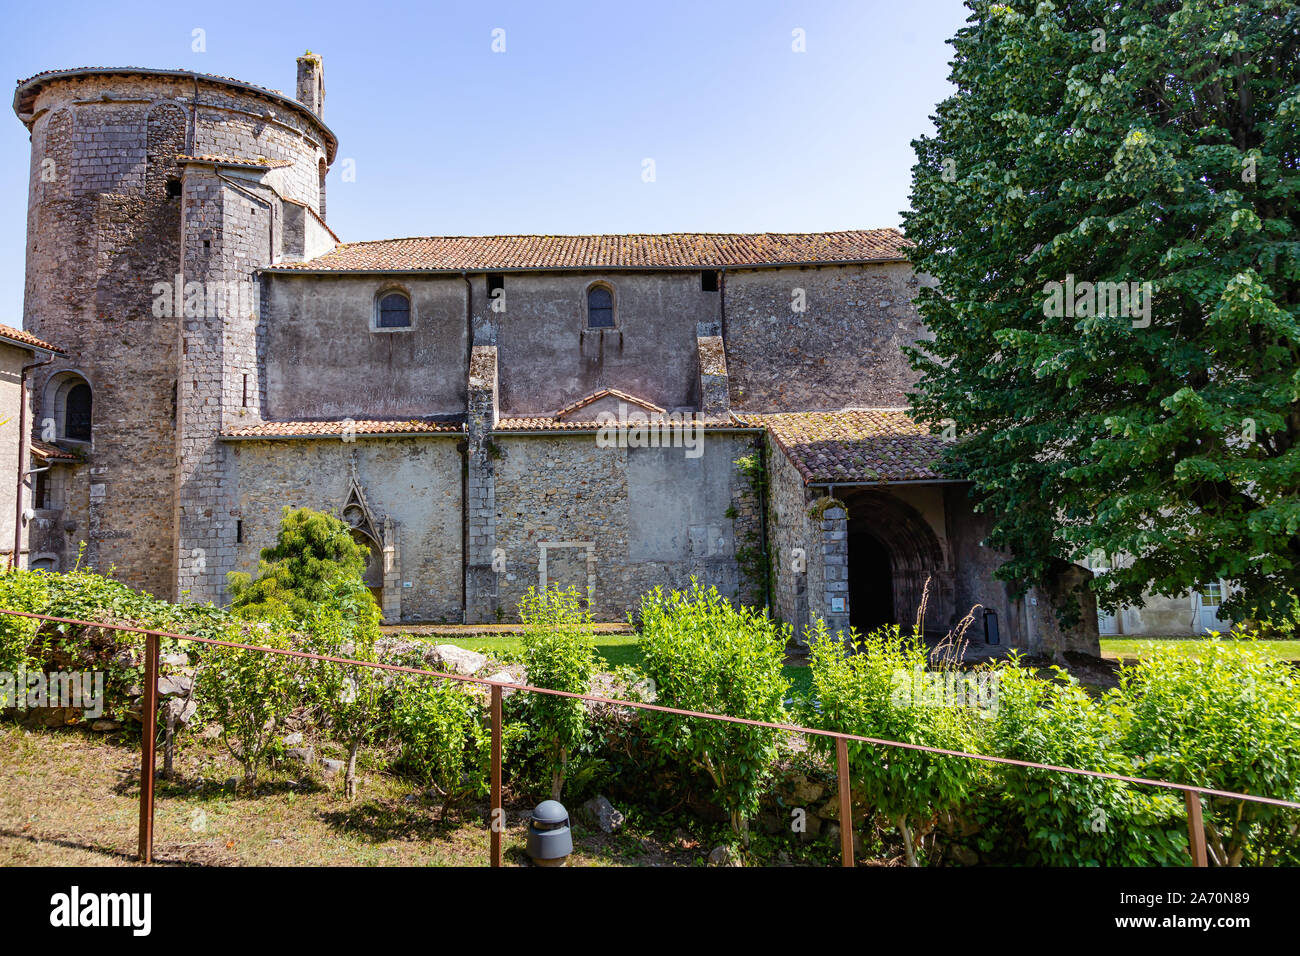 Palace of Bishops and Departmental Museum of Ariège, Saint Lizier, in the department of Ariège, Pyrenees, Occitanie, France Stock Photo